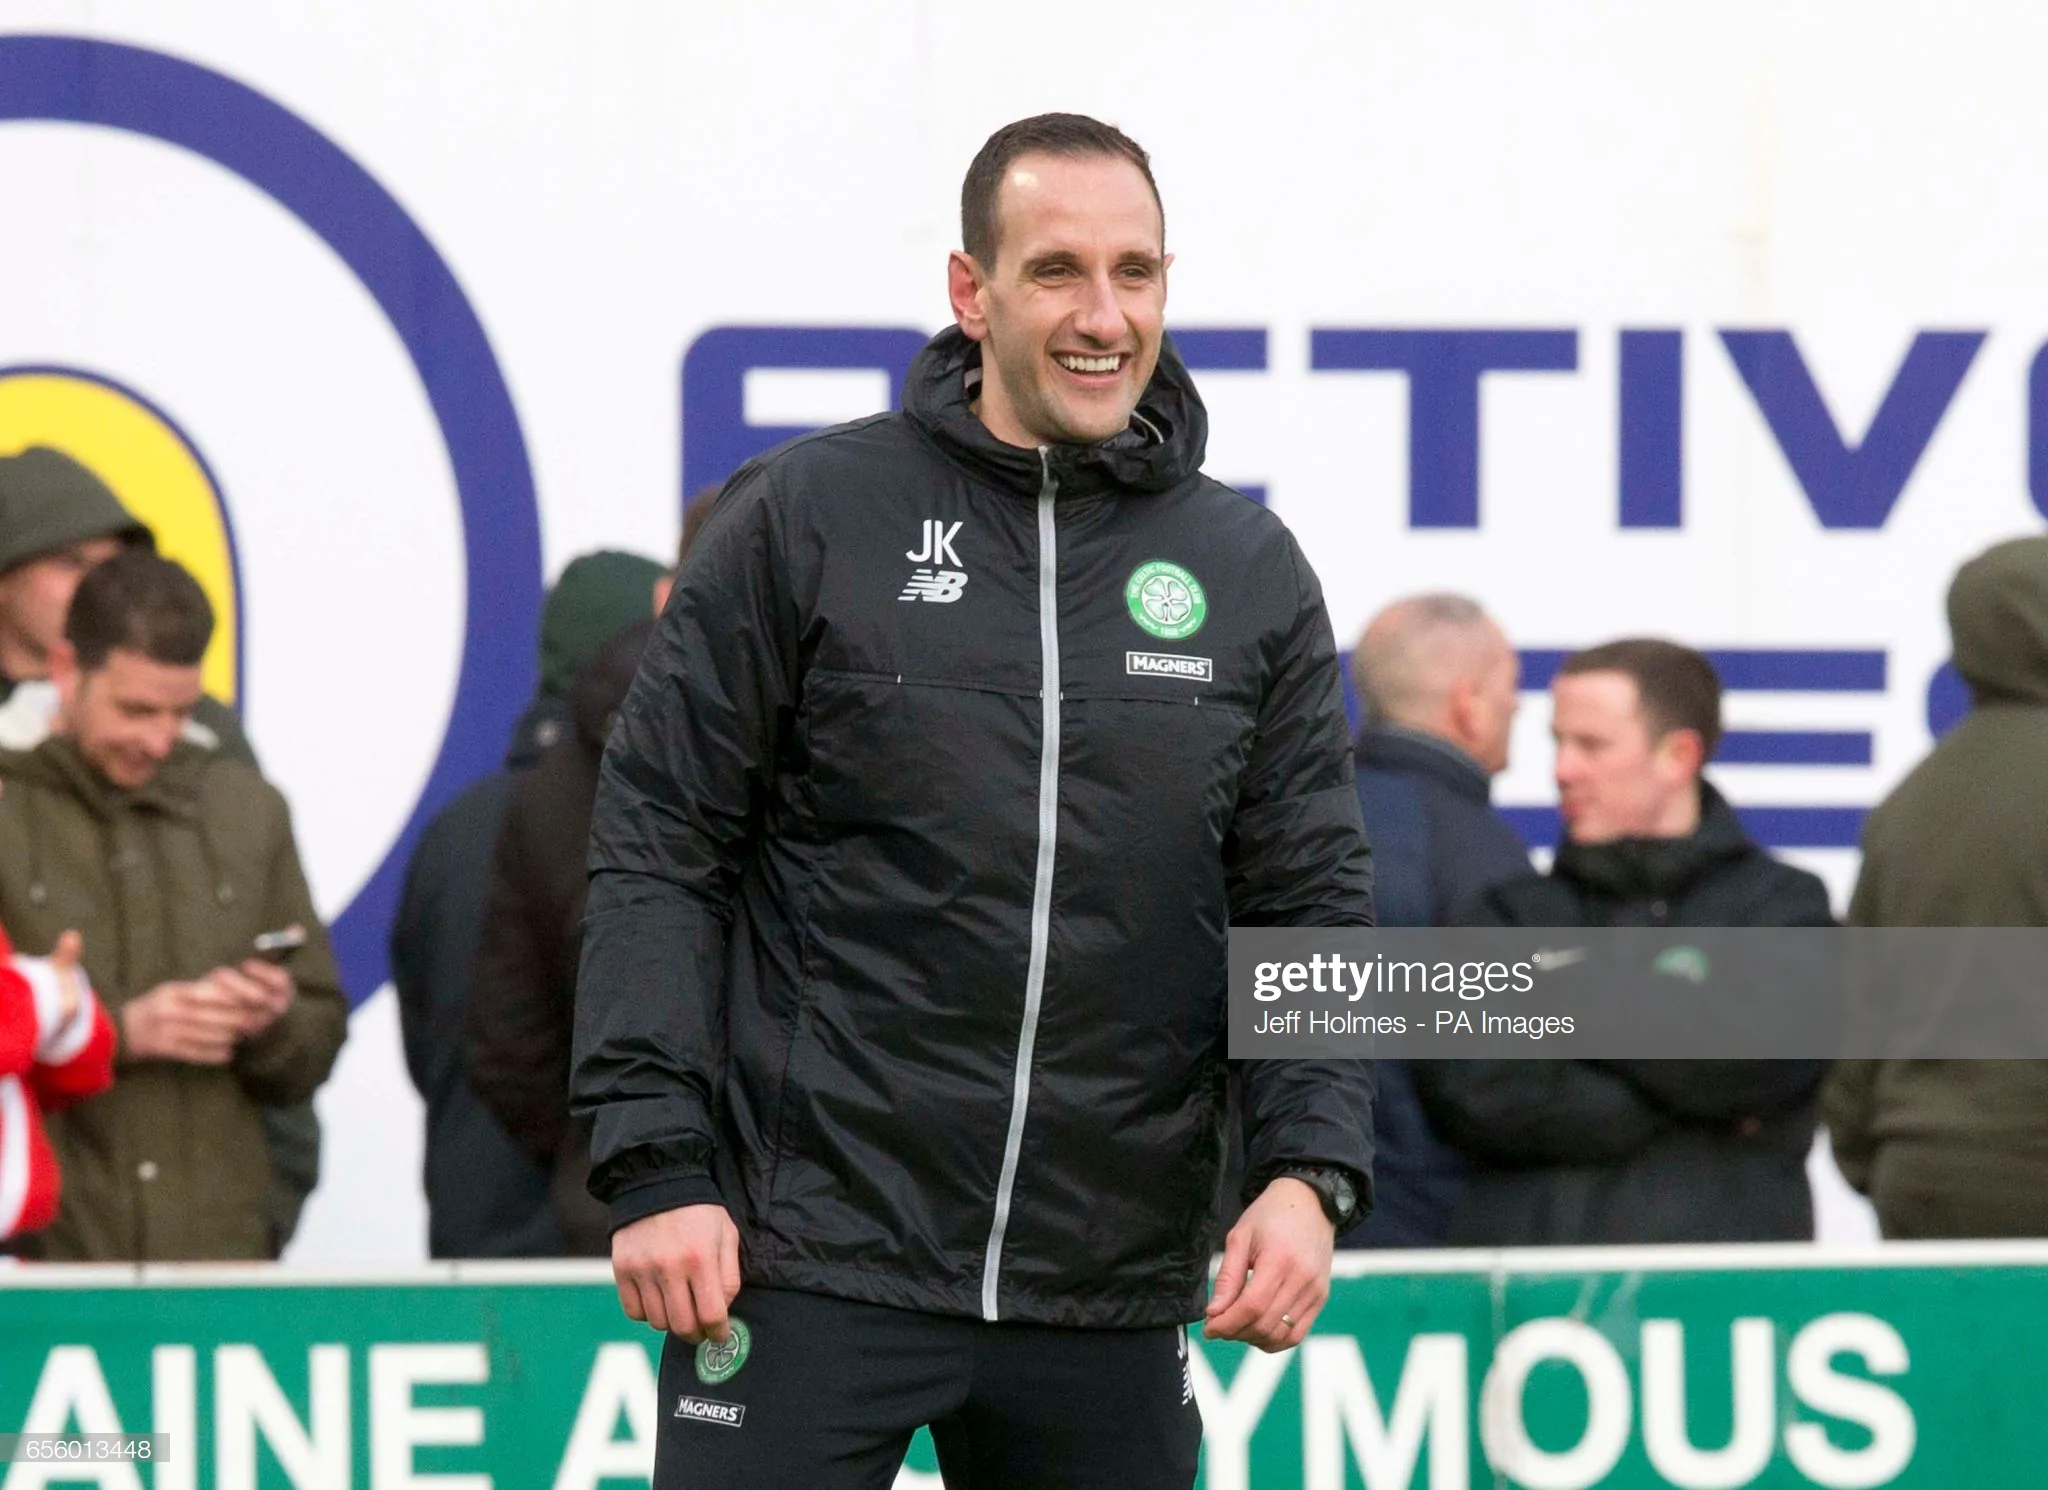 Celtic coach John Kennedy  (Photo by Jeff Holmes/PA Images via Getty Images)